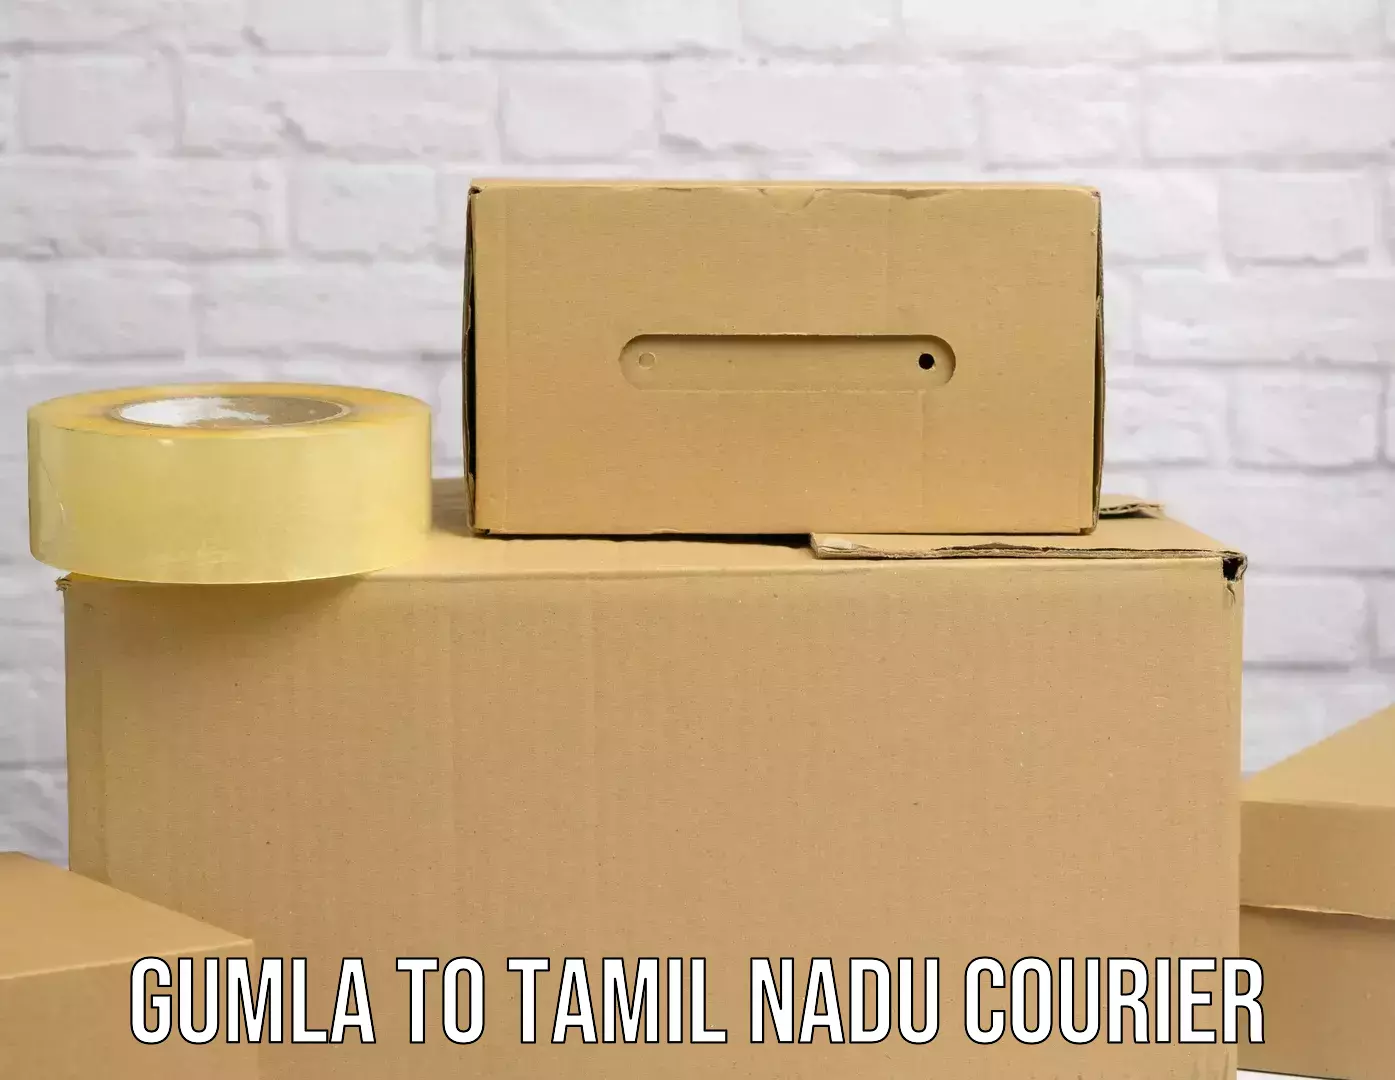 Nationwide courier service Gumla to Rajapalayam